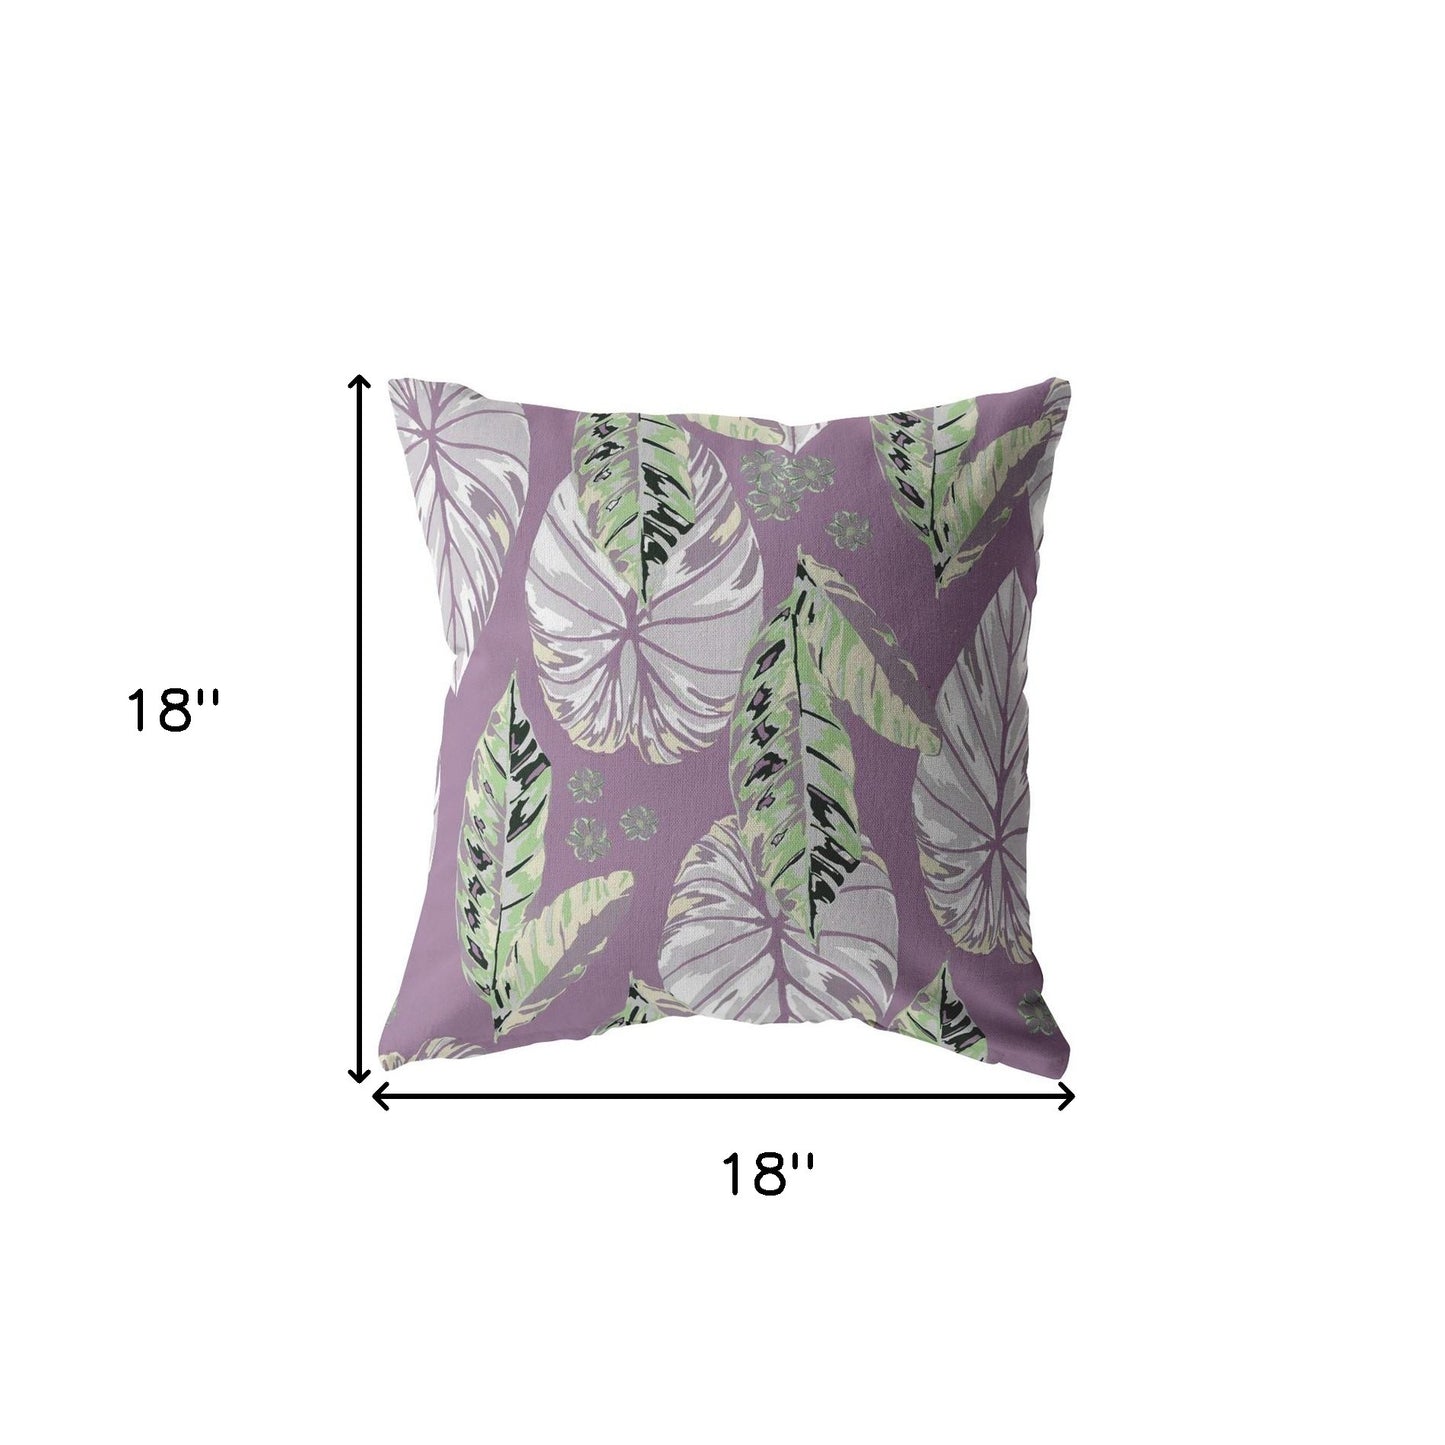 18” White Purple Tropical Leaf Suede Throw Pillow